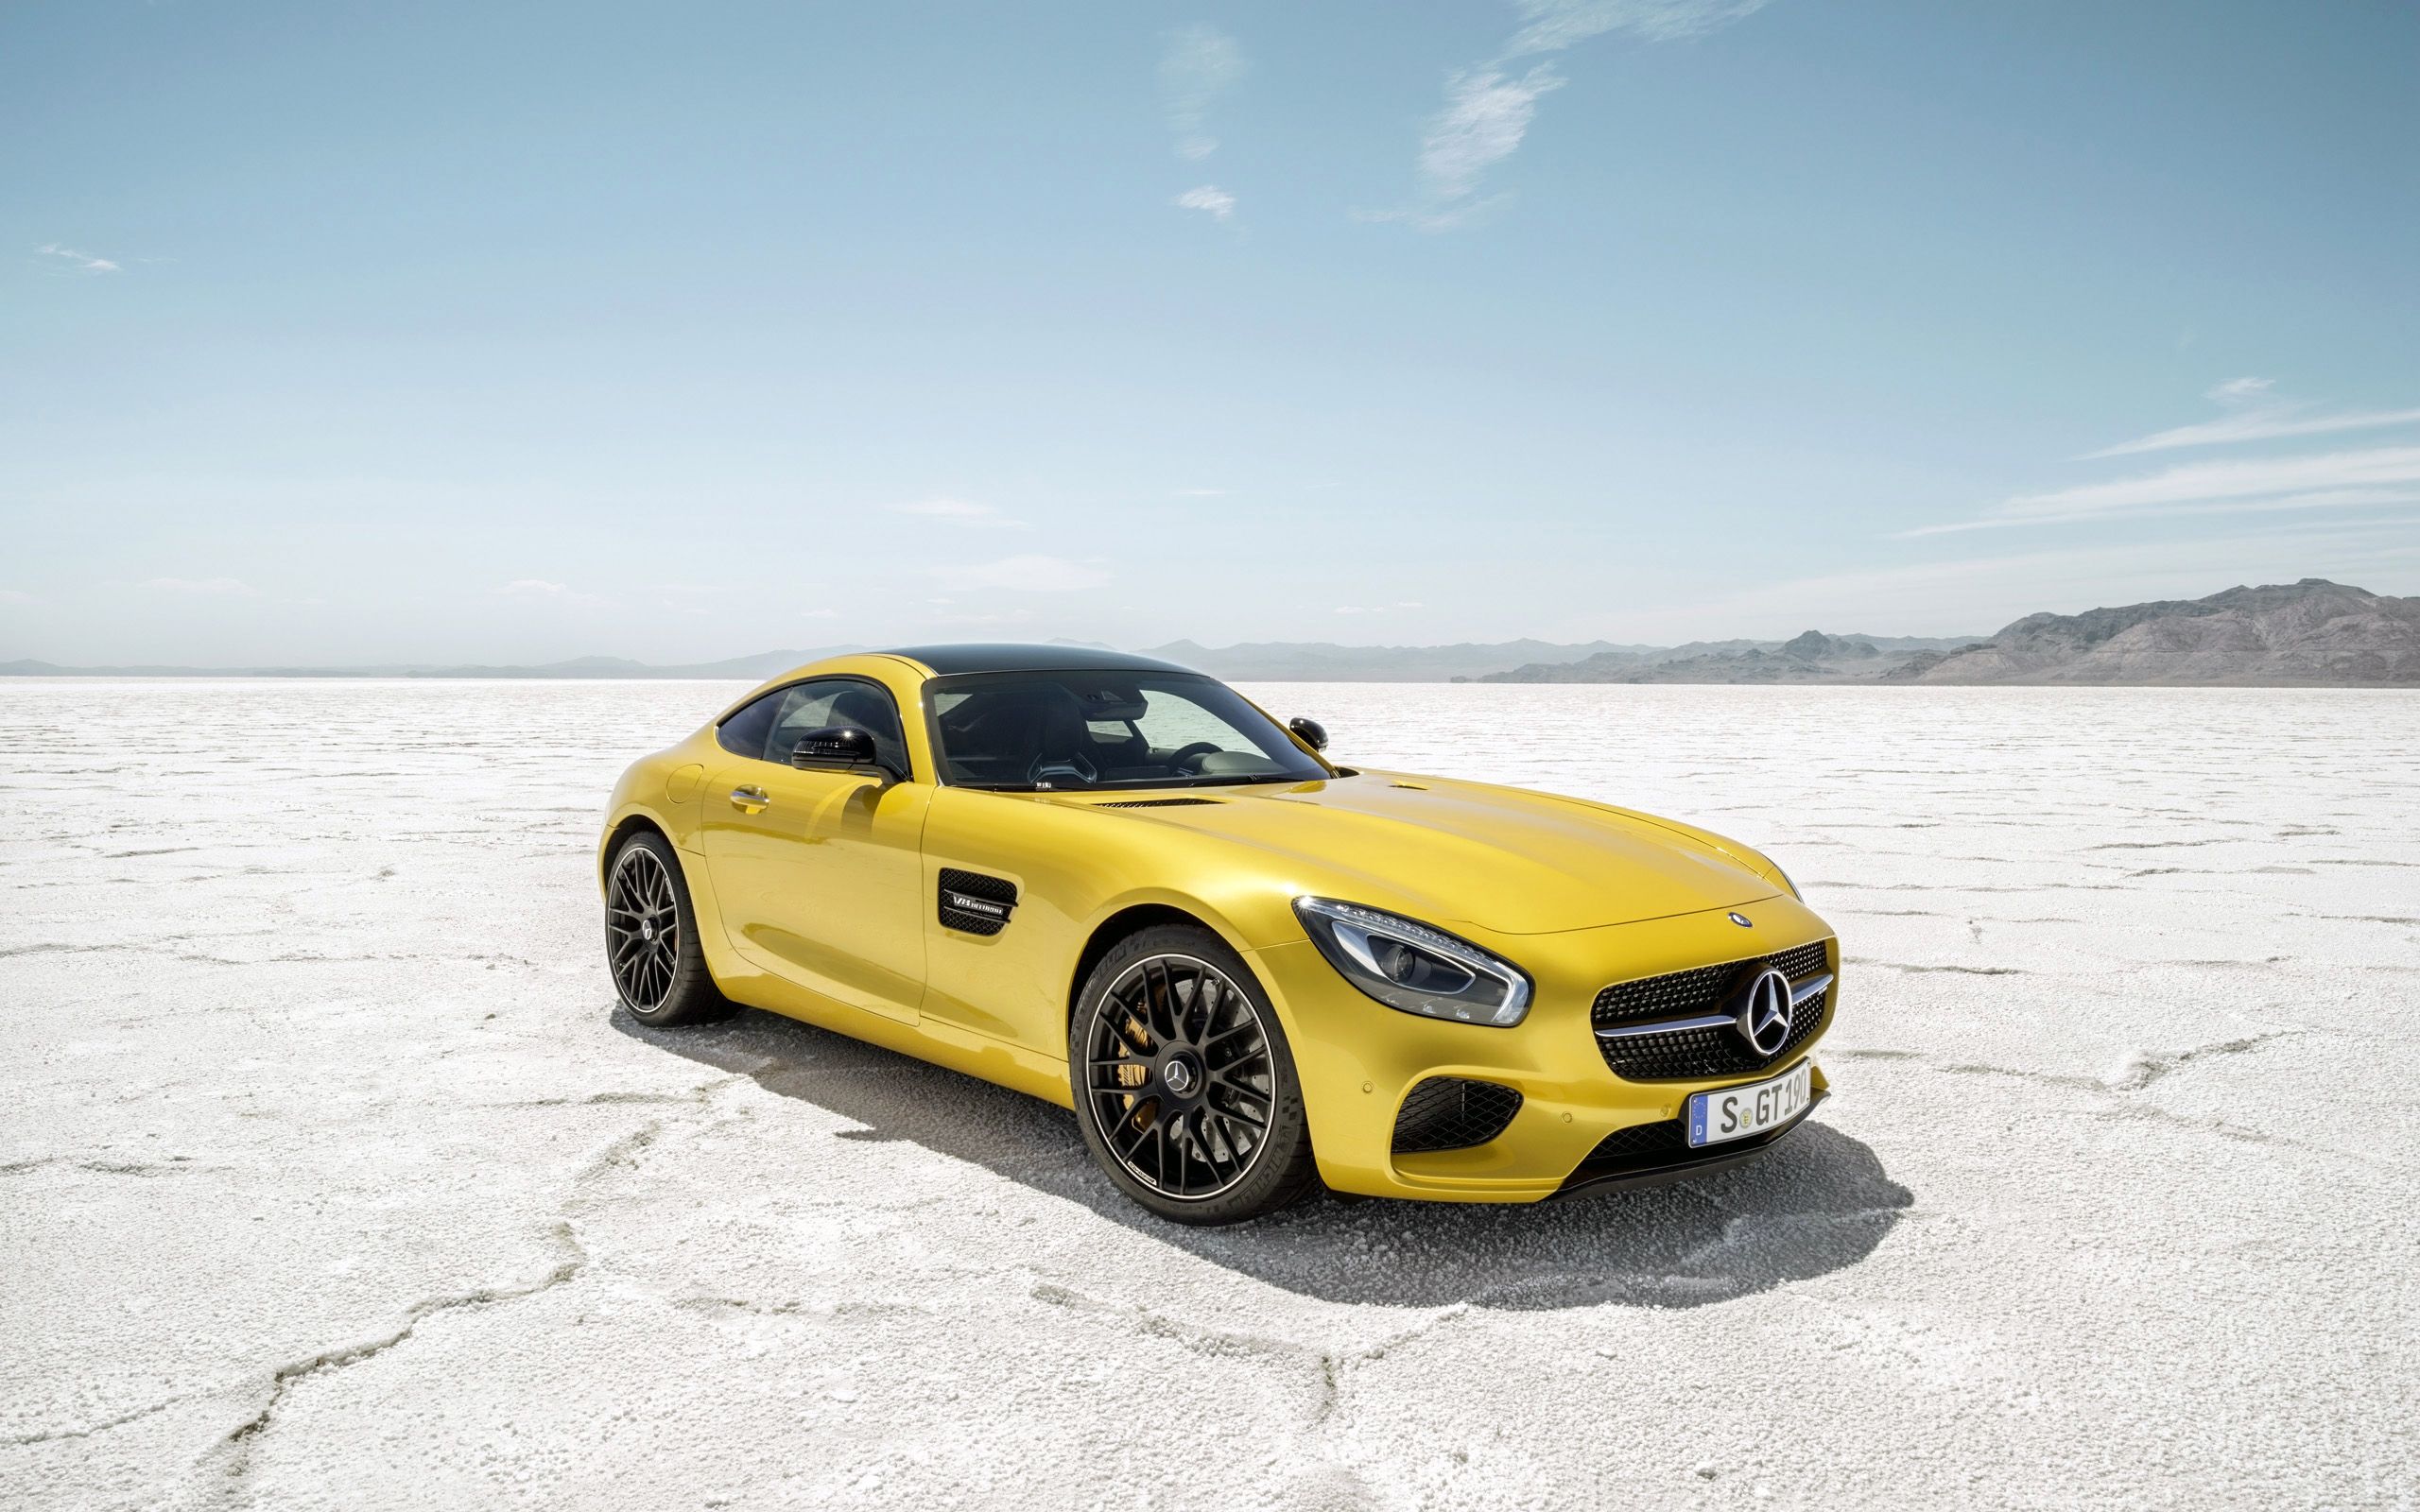 AMG GT Wallpaper Free AMG GT Background